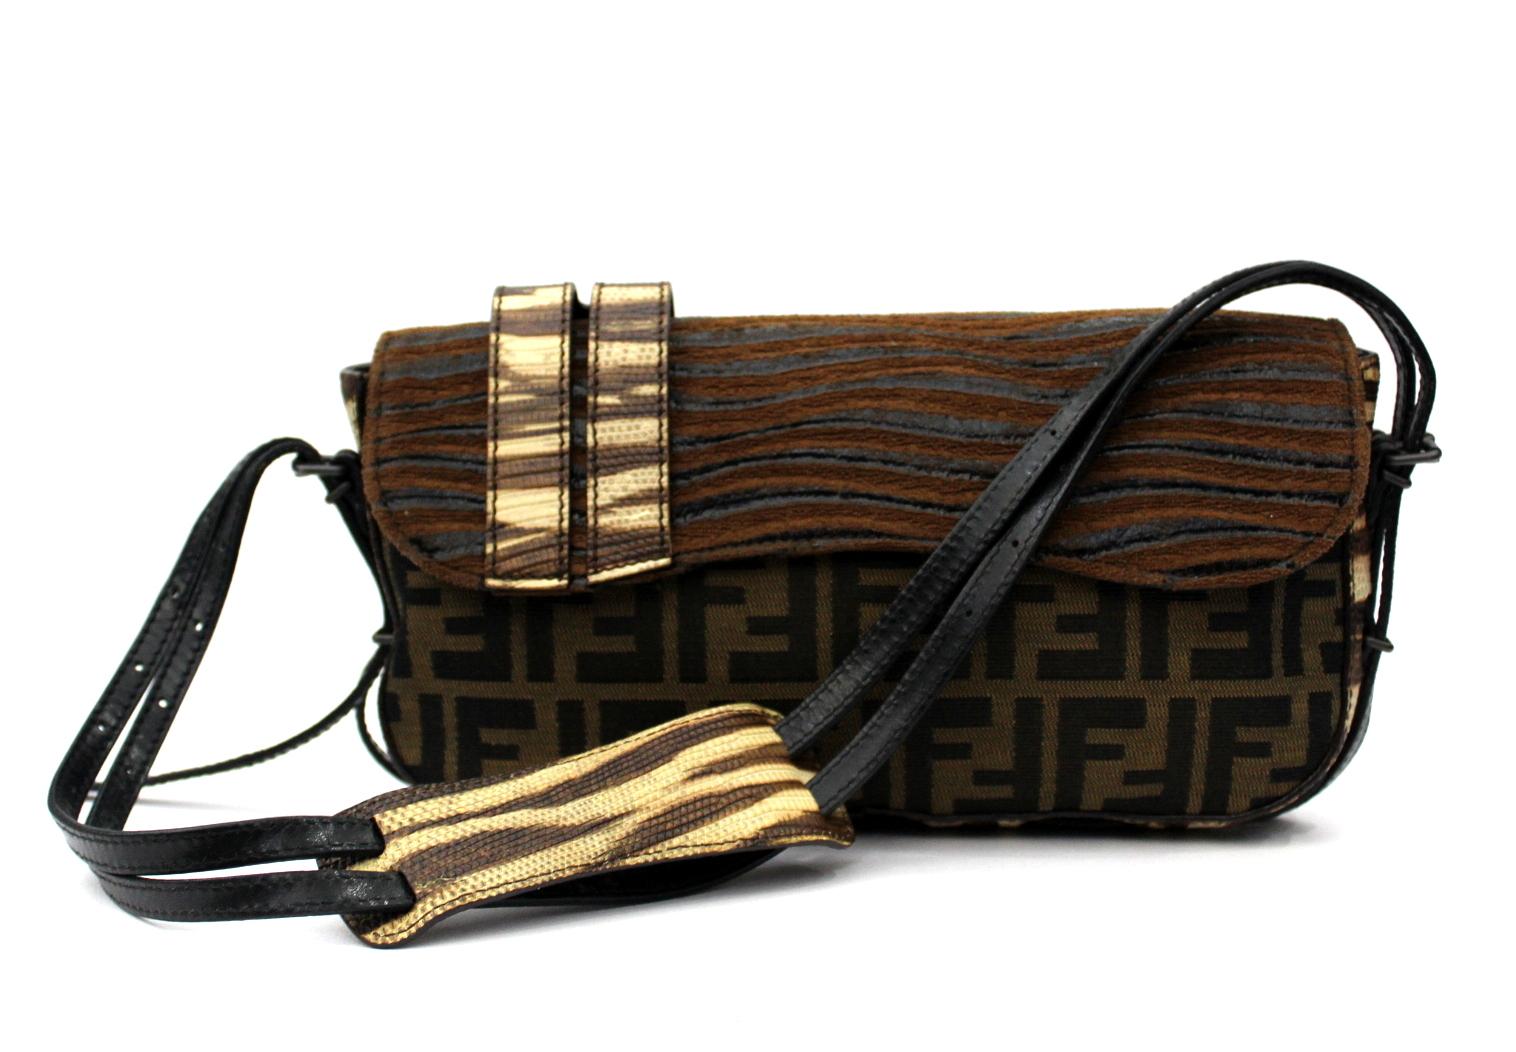 Brown fendi bag with tiger print. In canvas with dark brown leather details.
Wearable on the shoulder thanks to the leather handle, internally discreetly capacious.
Magnetic button closure. Small but very detailed. Excellent condition.